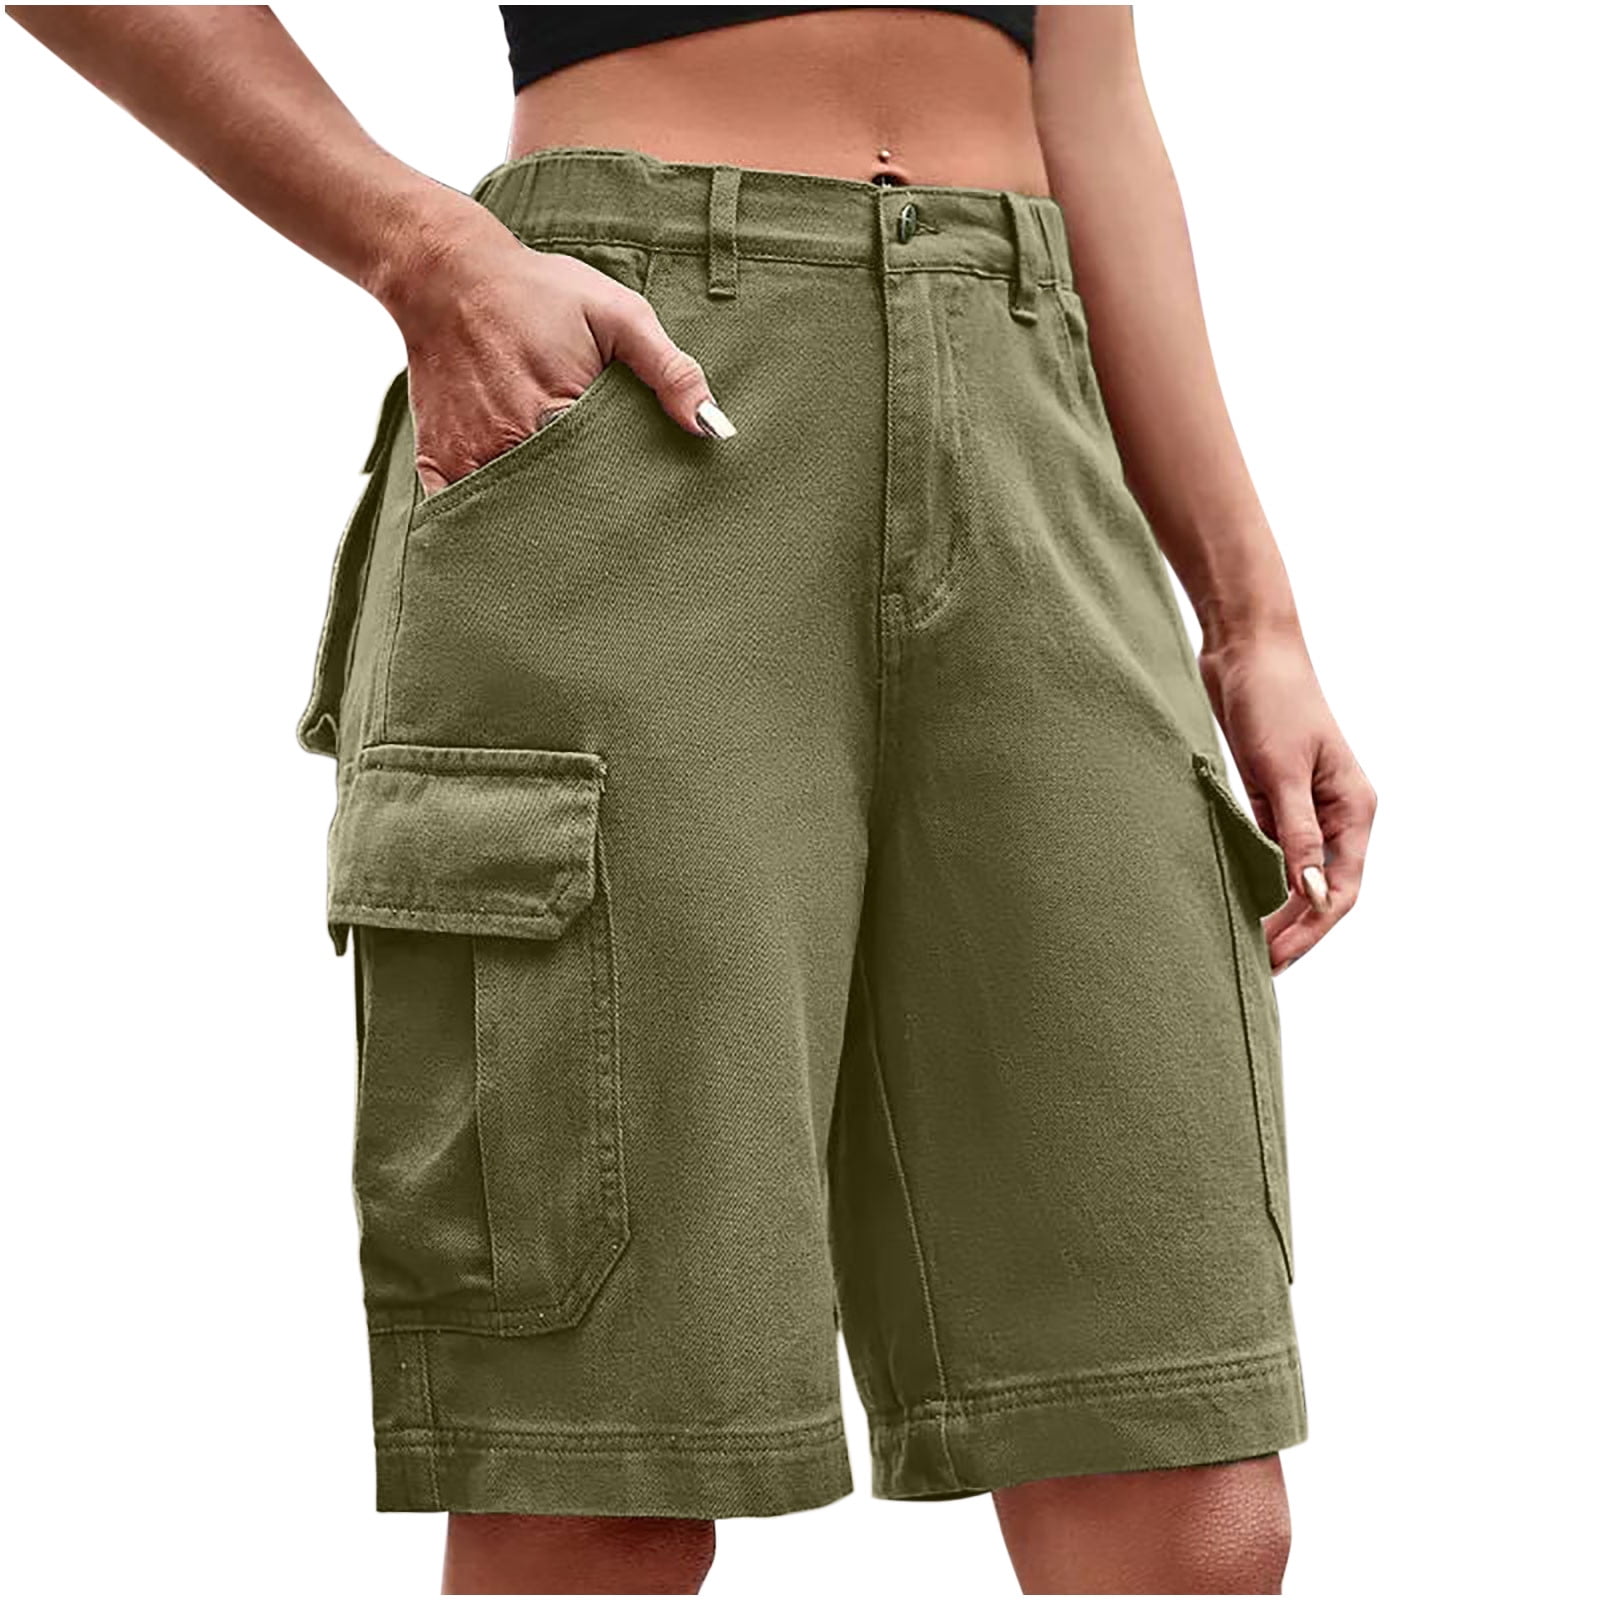 BGFIIPAJG Girls Cycling Shorts Age 6-7 Womens Chino Shorts 3/4 Cargo Shorts  Bermuda Shorts for Women Army Surplus Trousers Ladies Jeans Size 18  Swimming Leggings Black dye for Jeans Kids Shorts 